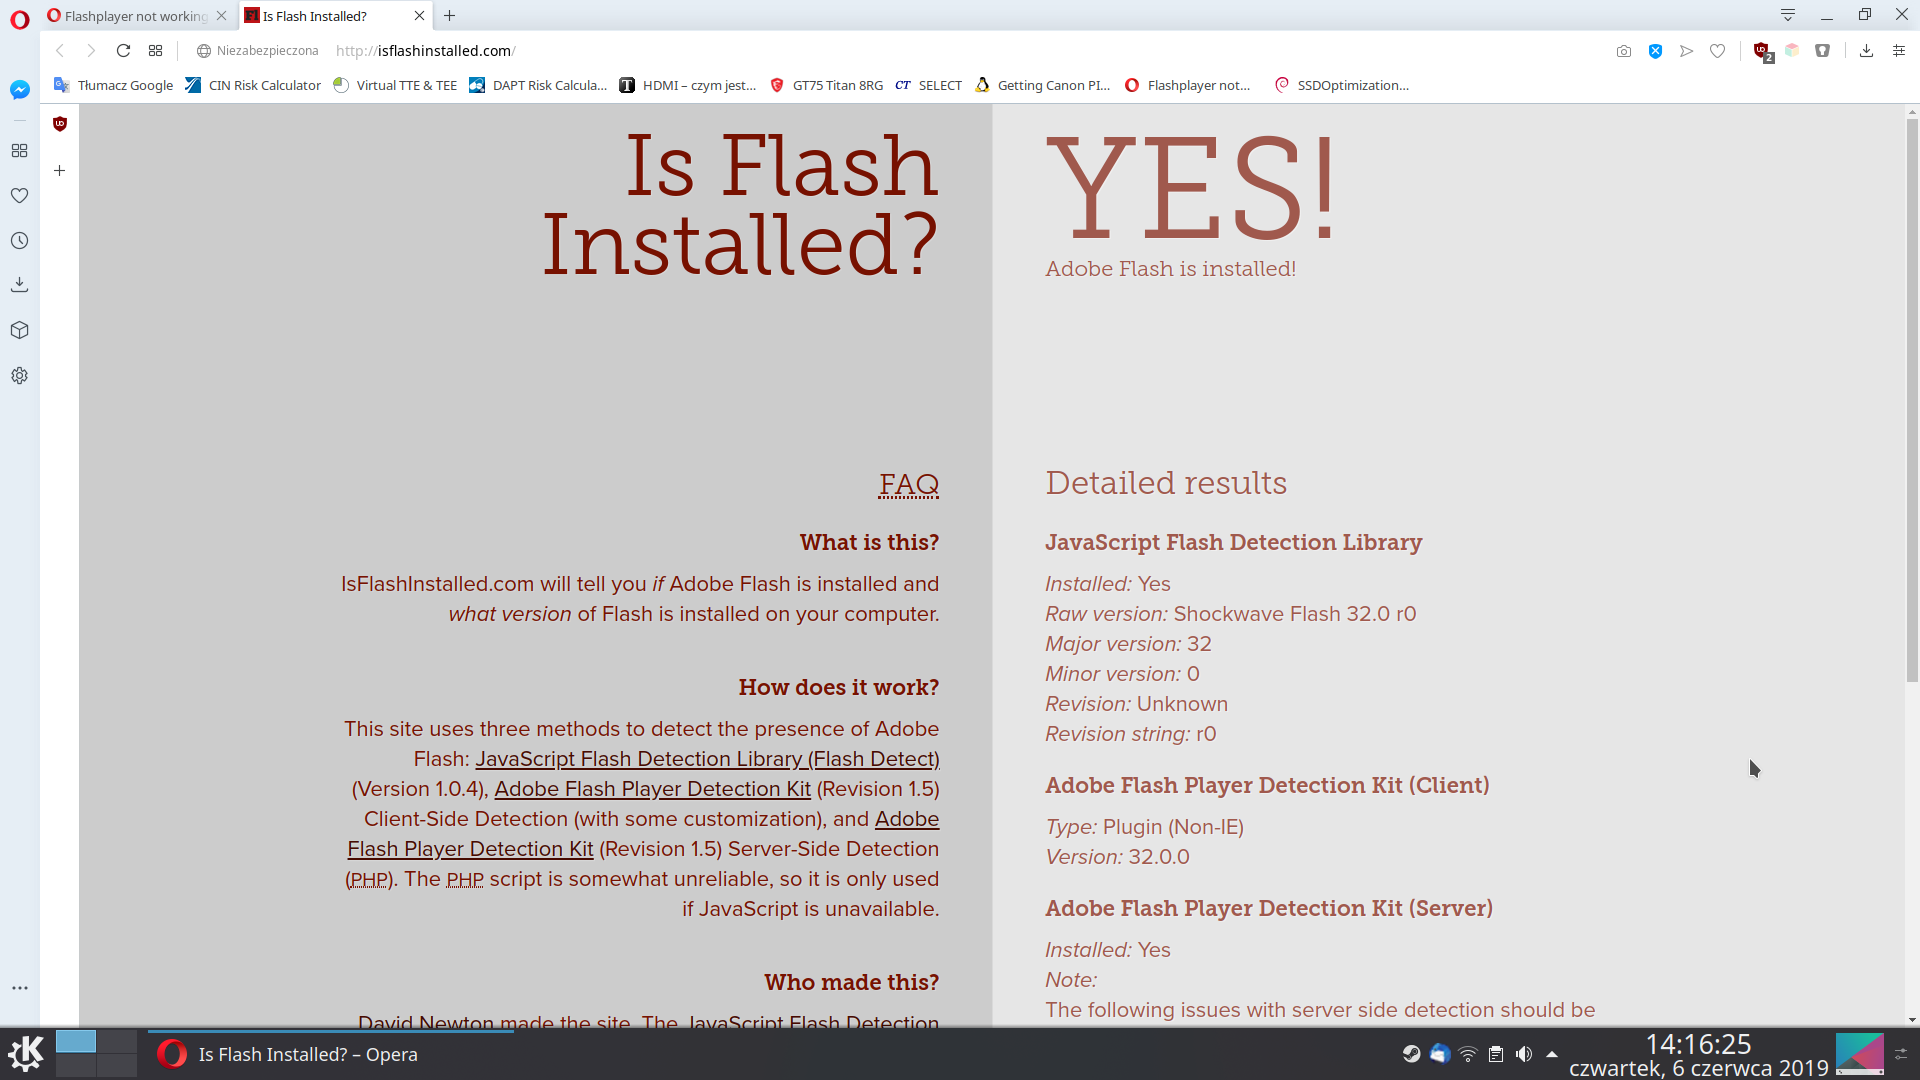 Does opera support flash